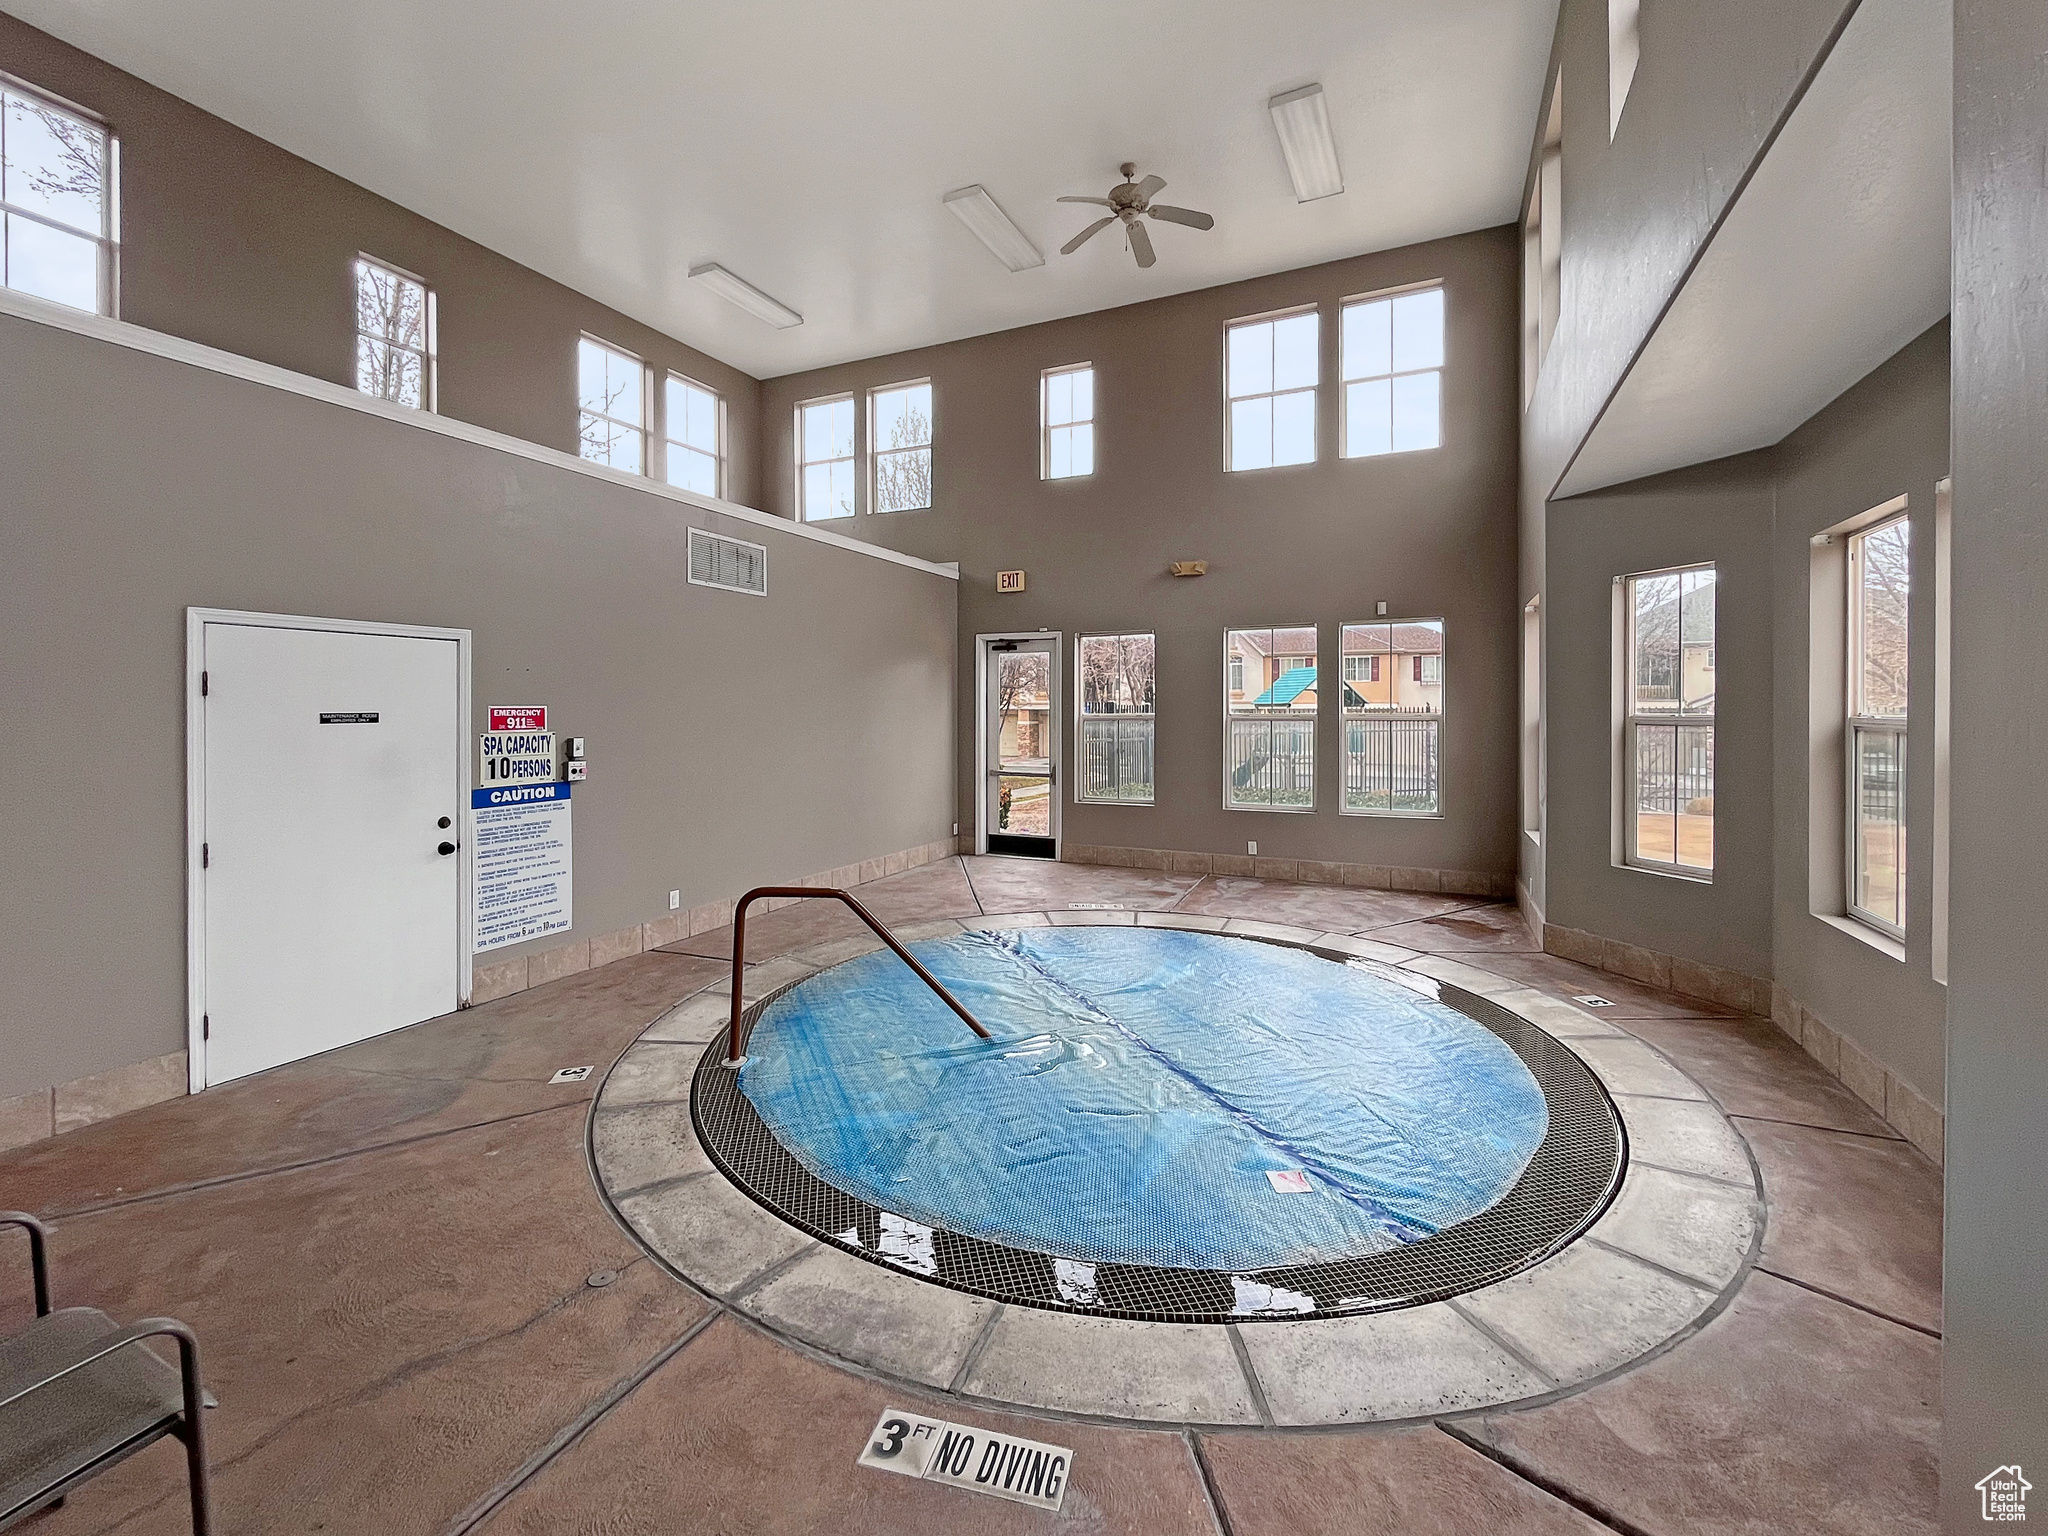 Indoor spa in the community center, open during winter months when outdoor pool is closed